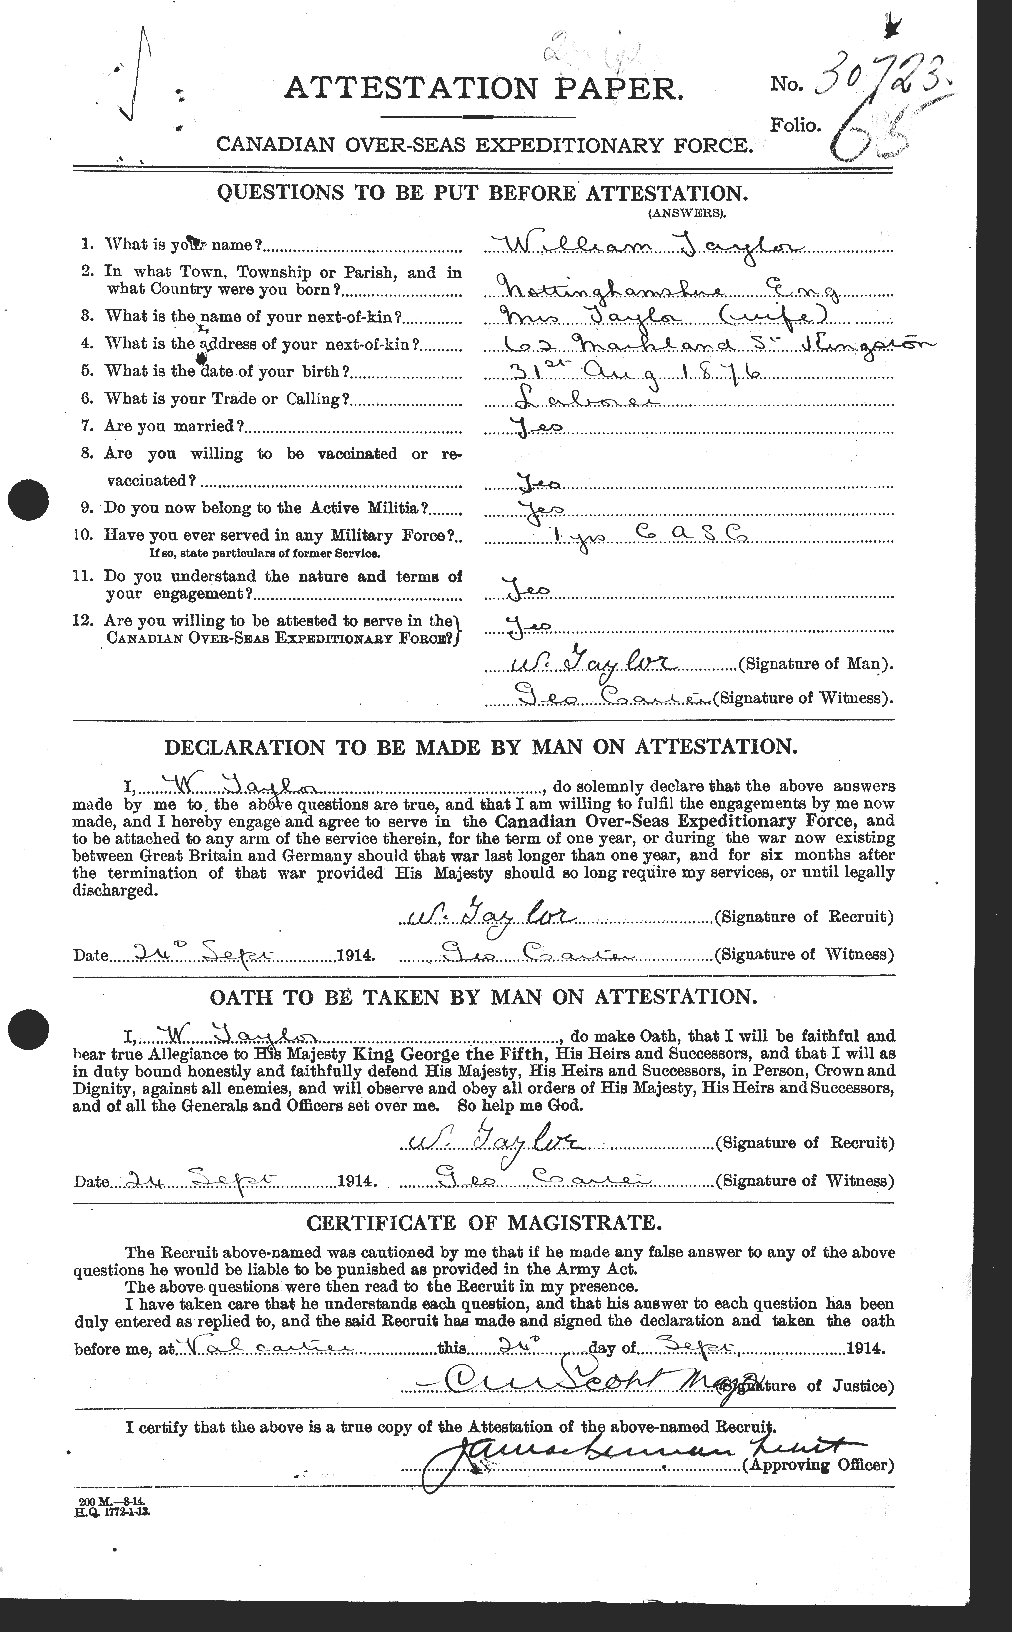 Personnel Records of the First World War - CEF 628107a